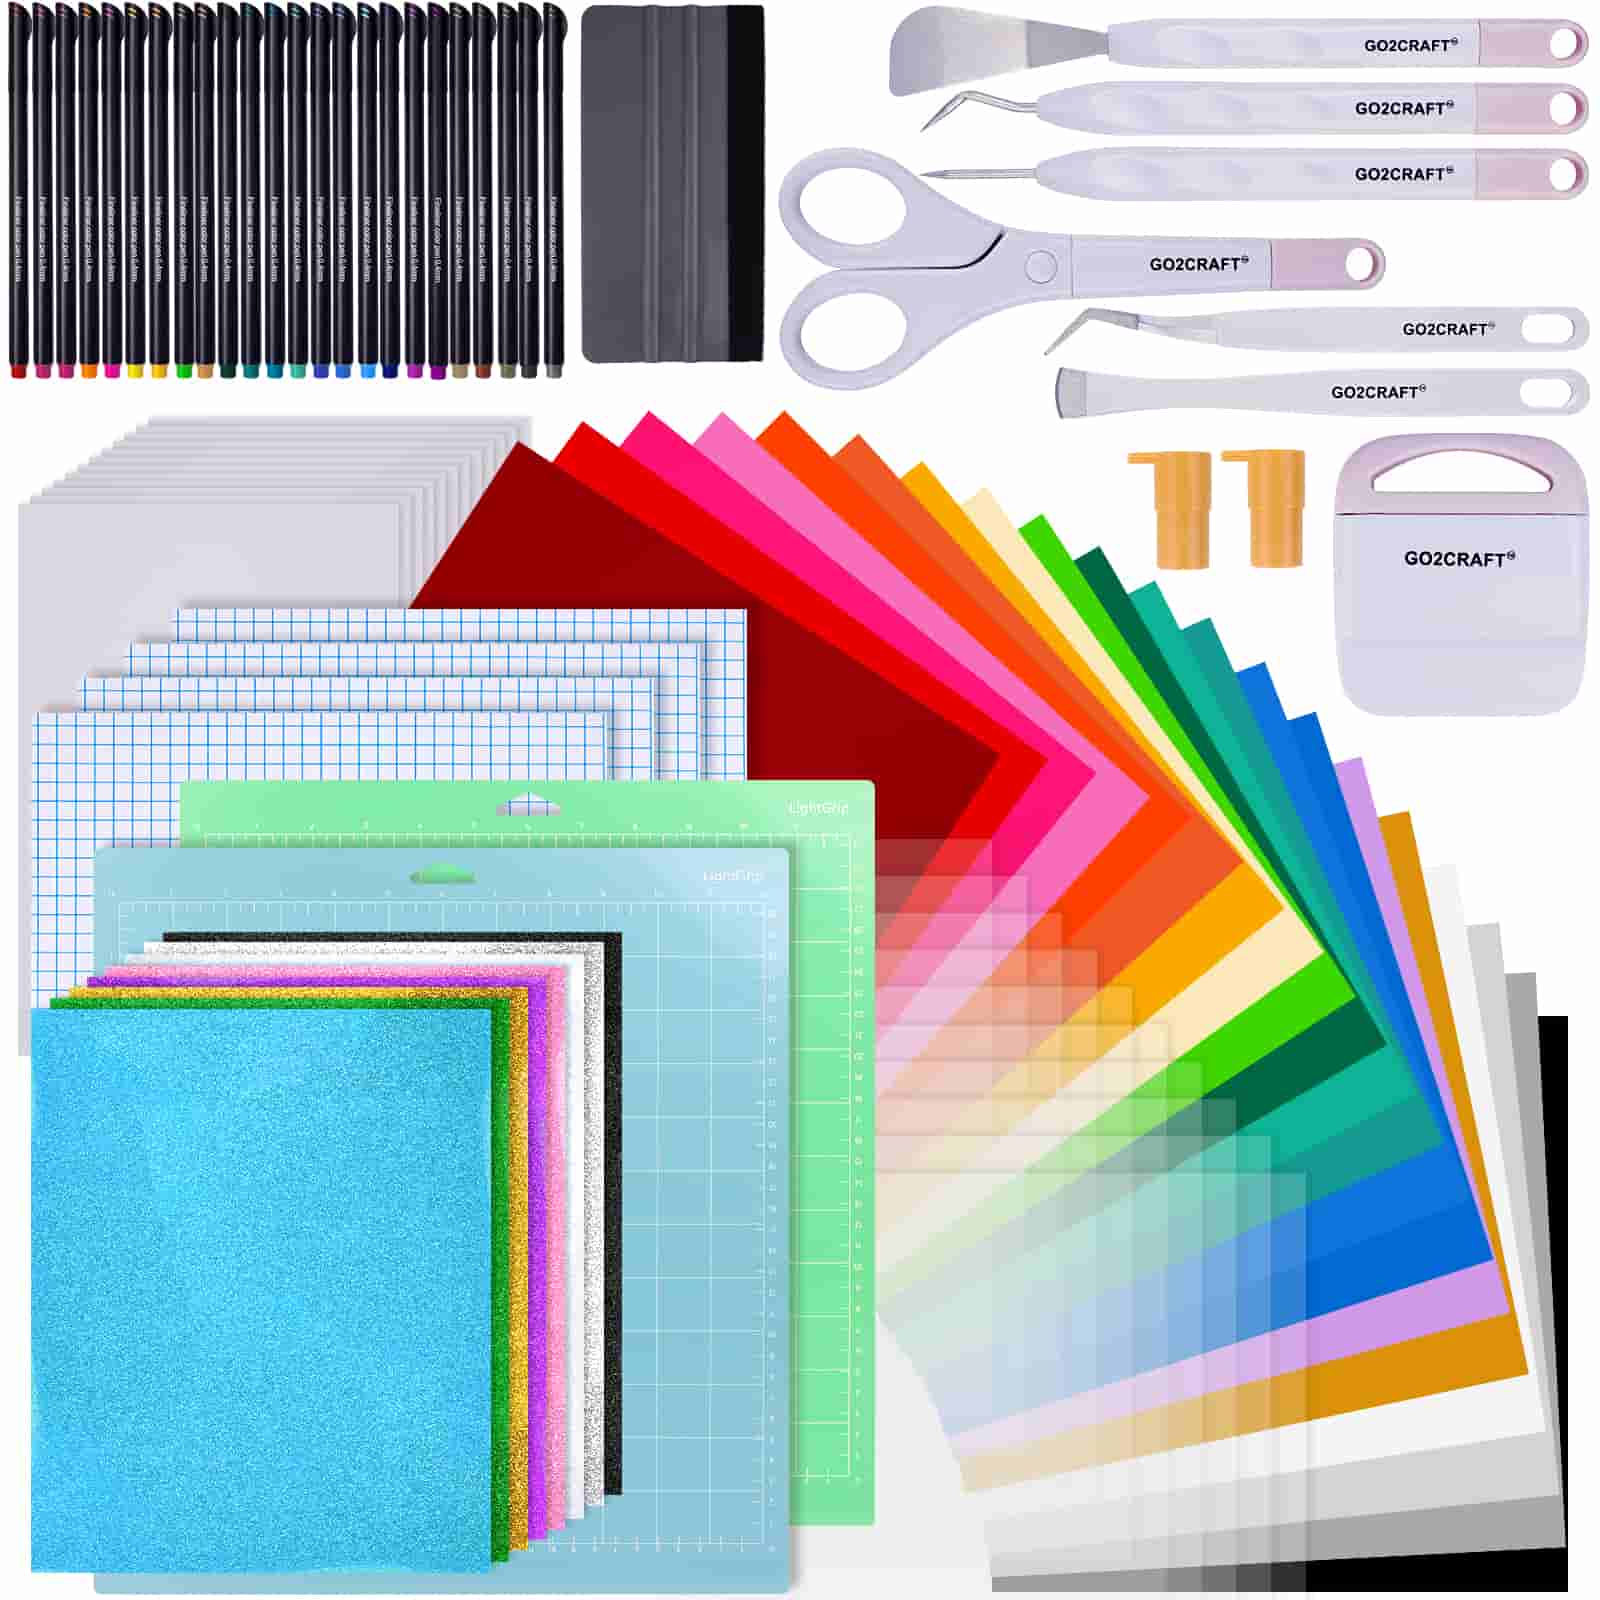 Accessories Bundle for Cricut Makers and All Explore Air